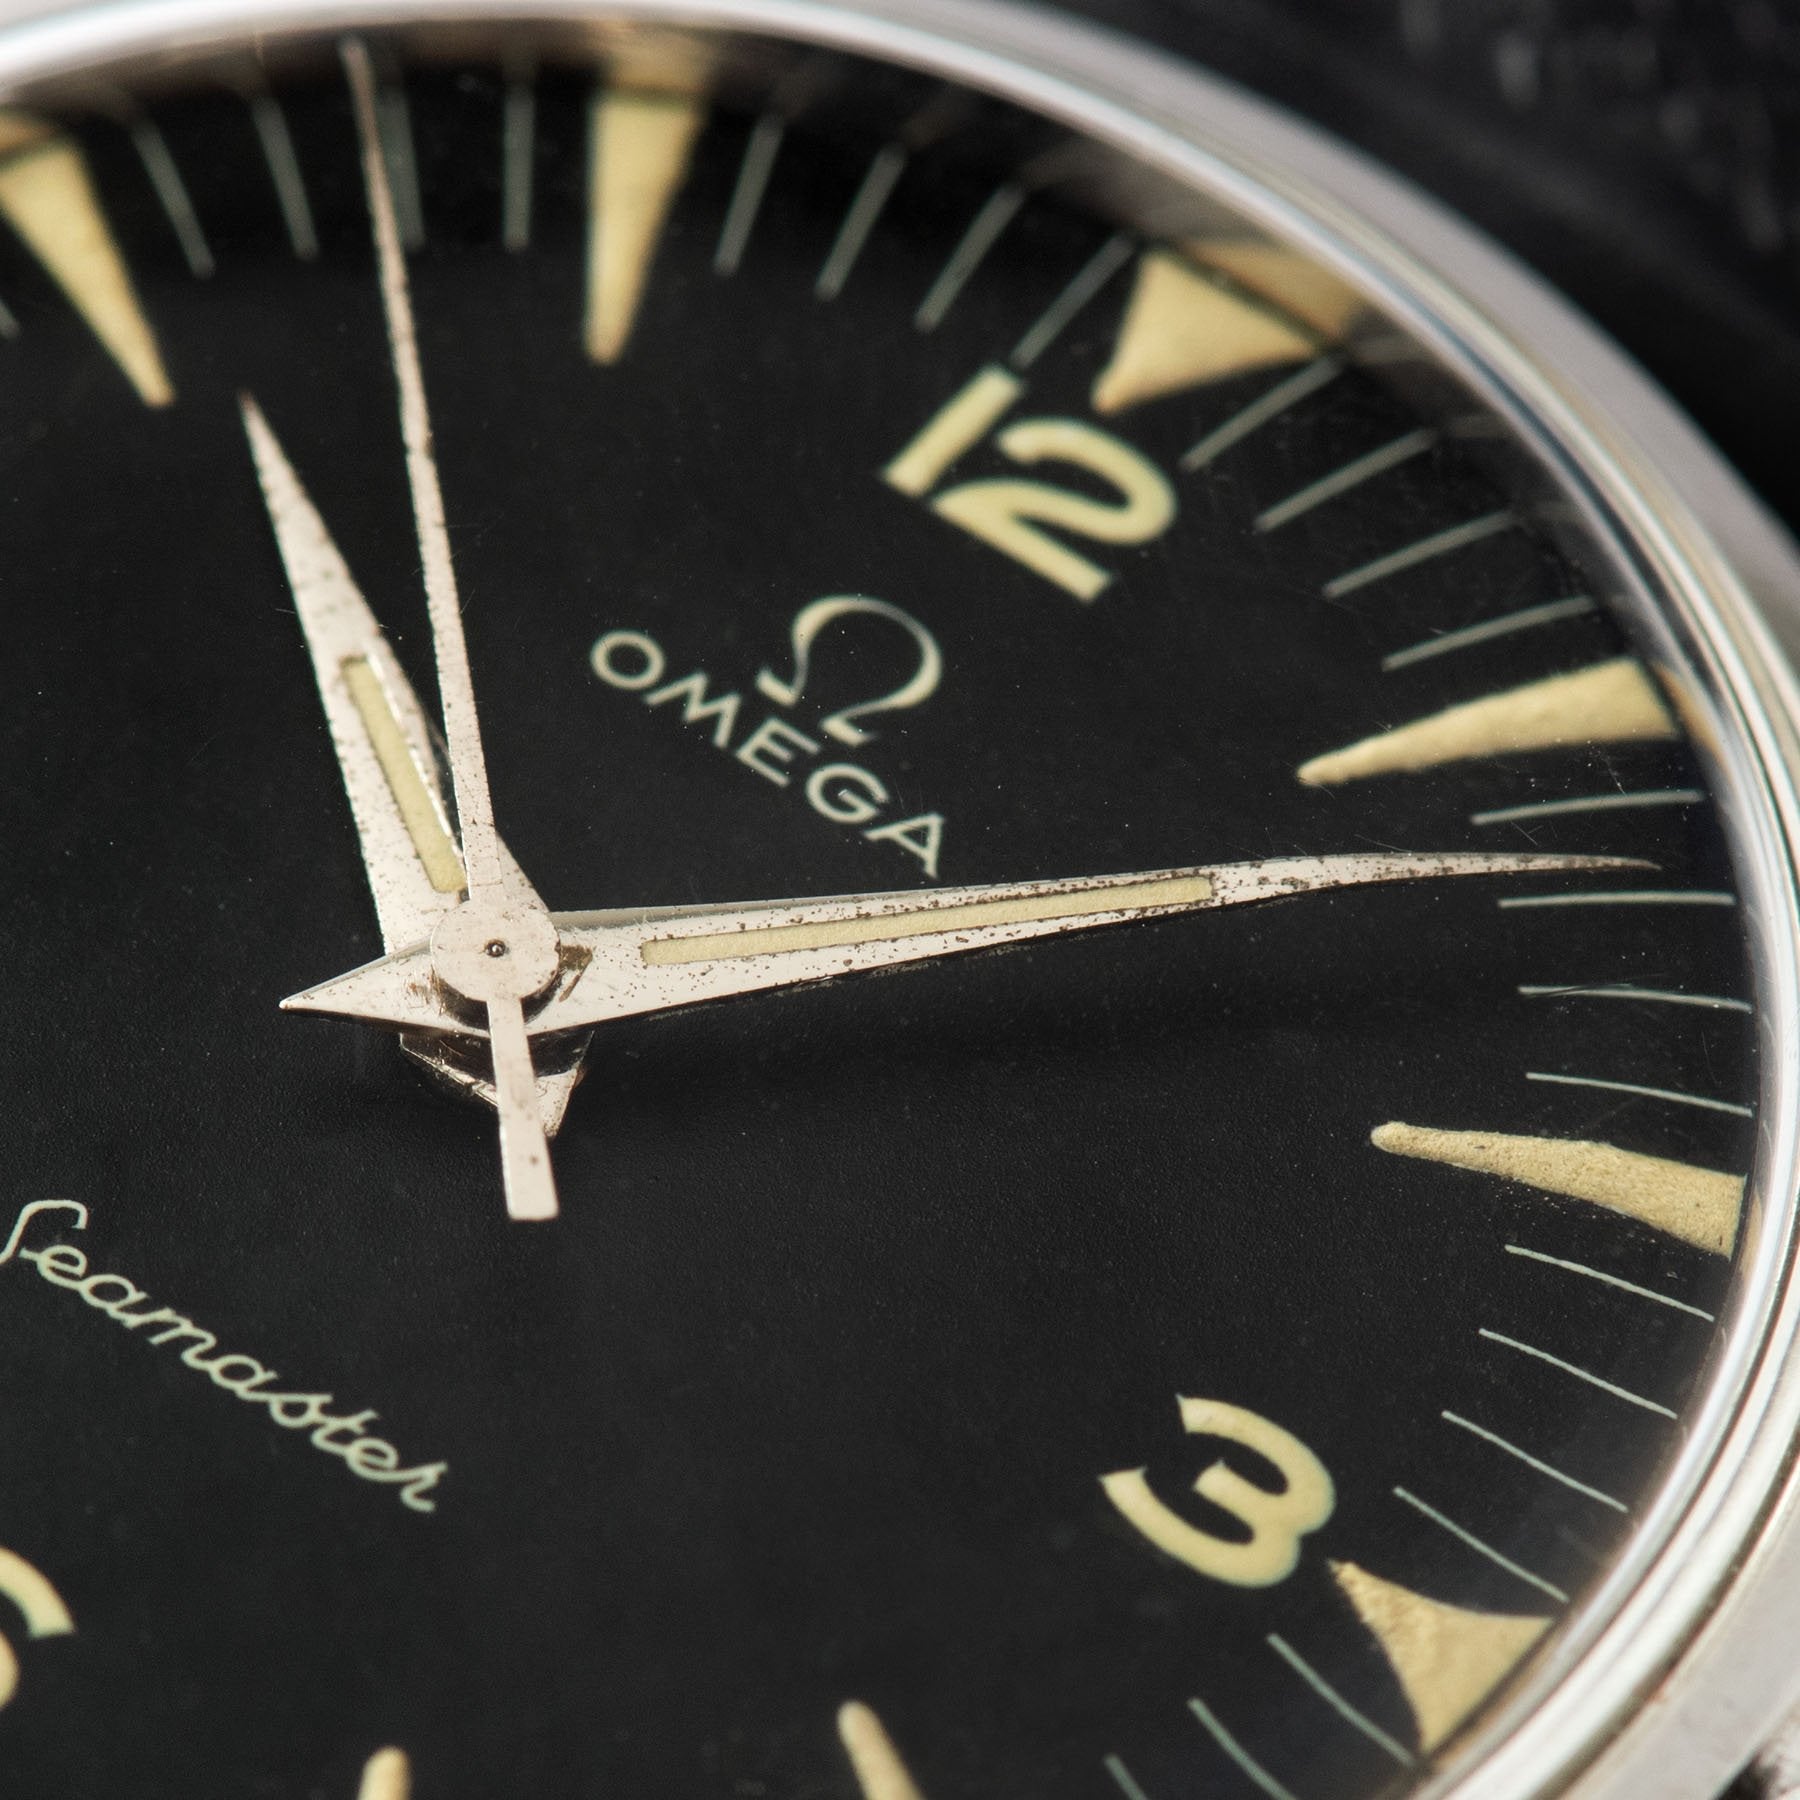 Omega Seamaster CK 2996 Pakistan Air Force Issued